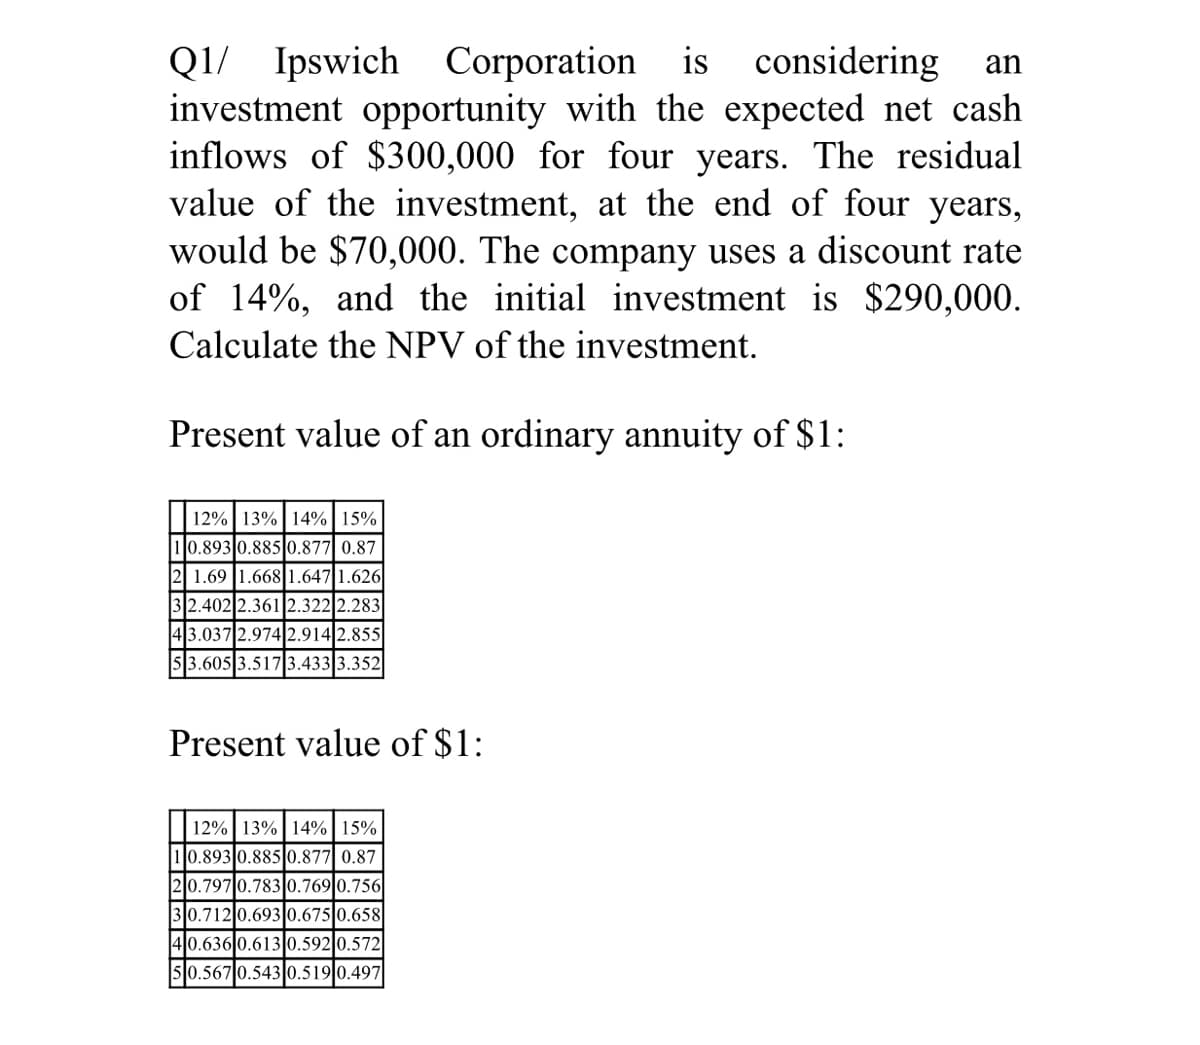 Q1/ Ipswich Corporation is considering an
investment opportunity with the expected net cash
inflows of $300,000 for four years. The residual
value of the investment, at the end of four years,
would be $70,000. The company uses a discount rate
of 14%, and the initial investment is $290,000.
Calculate the NPV of the investment.
Present value of an ordinary annuity of $1:
12% 13% | 14% | 15%
0.893 0.885 0.877 0.87
2 1.69 |1.6681.647 1.626
32.402 2.361 2.322 2.283
43.037 2.974 2.914 2.855
3.605 3.517 3.4333.352
Present value of $1:
12% 13% | 14% | 15%
0.893 0.885 0.877 0.87
20.797 0.783 0.769|0.756
30.712 0.6930.675 0.658
40.636 0.6130.592|0.572
50.567 0.543 0.519|0.497
